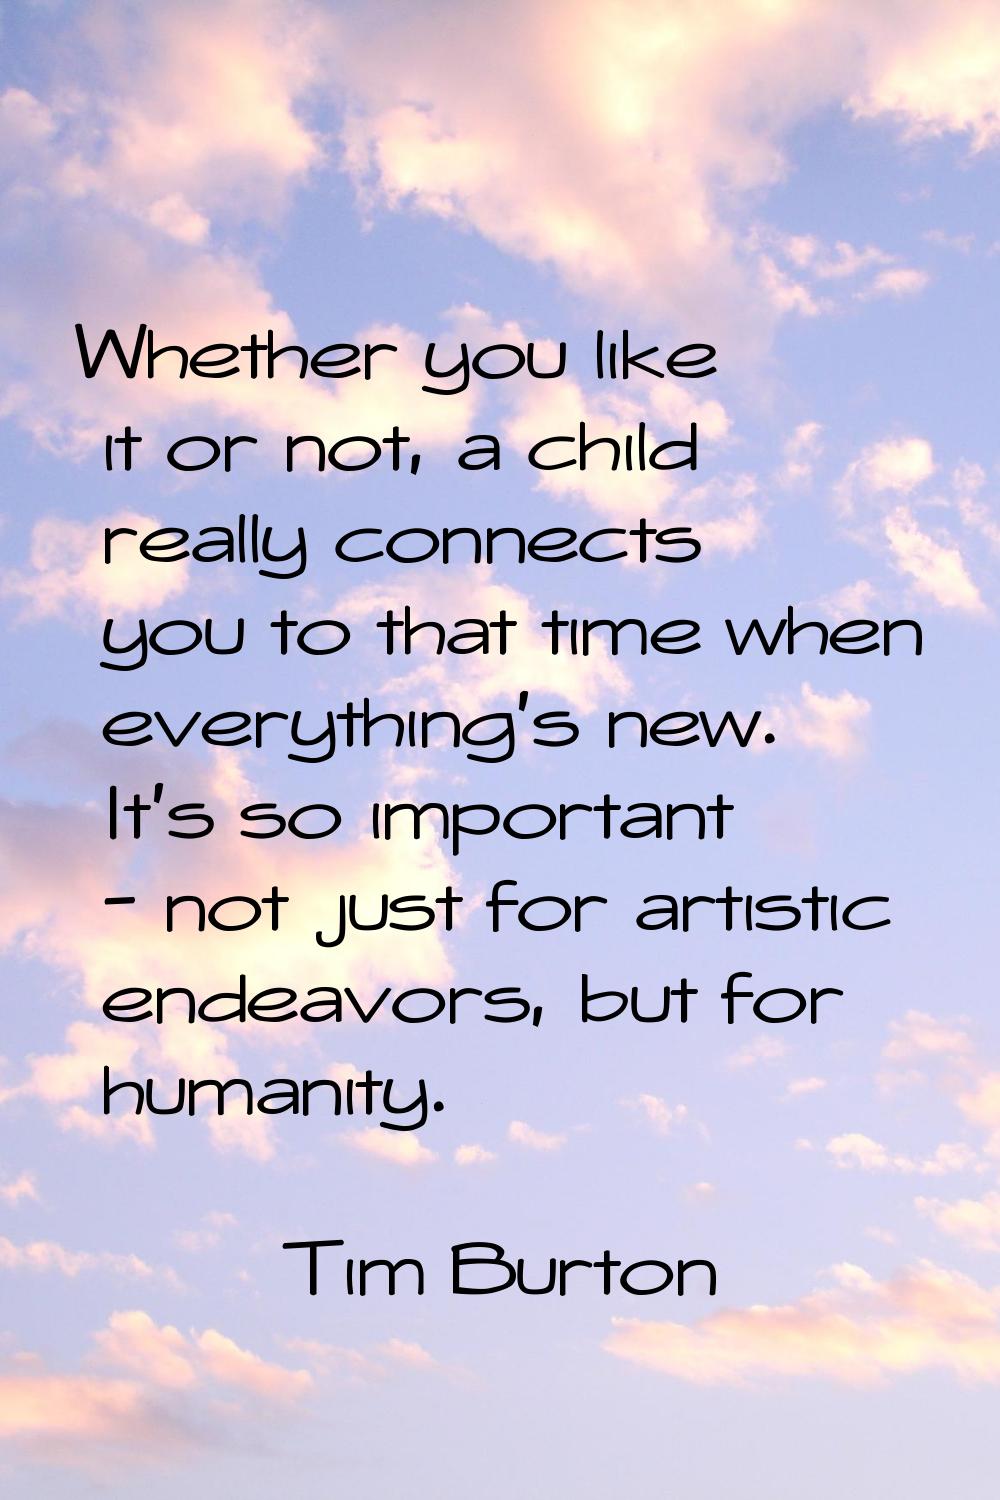 Whether you like it or not, a child really connects you to that time when everything's new. It's so